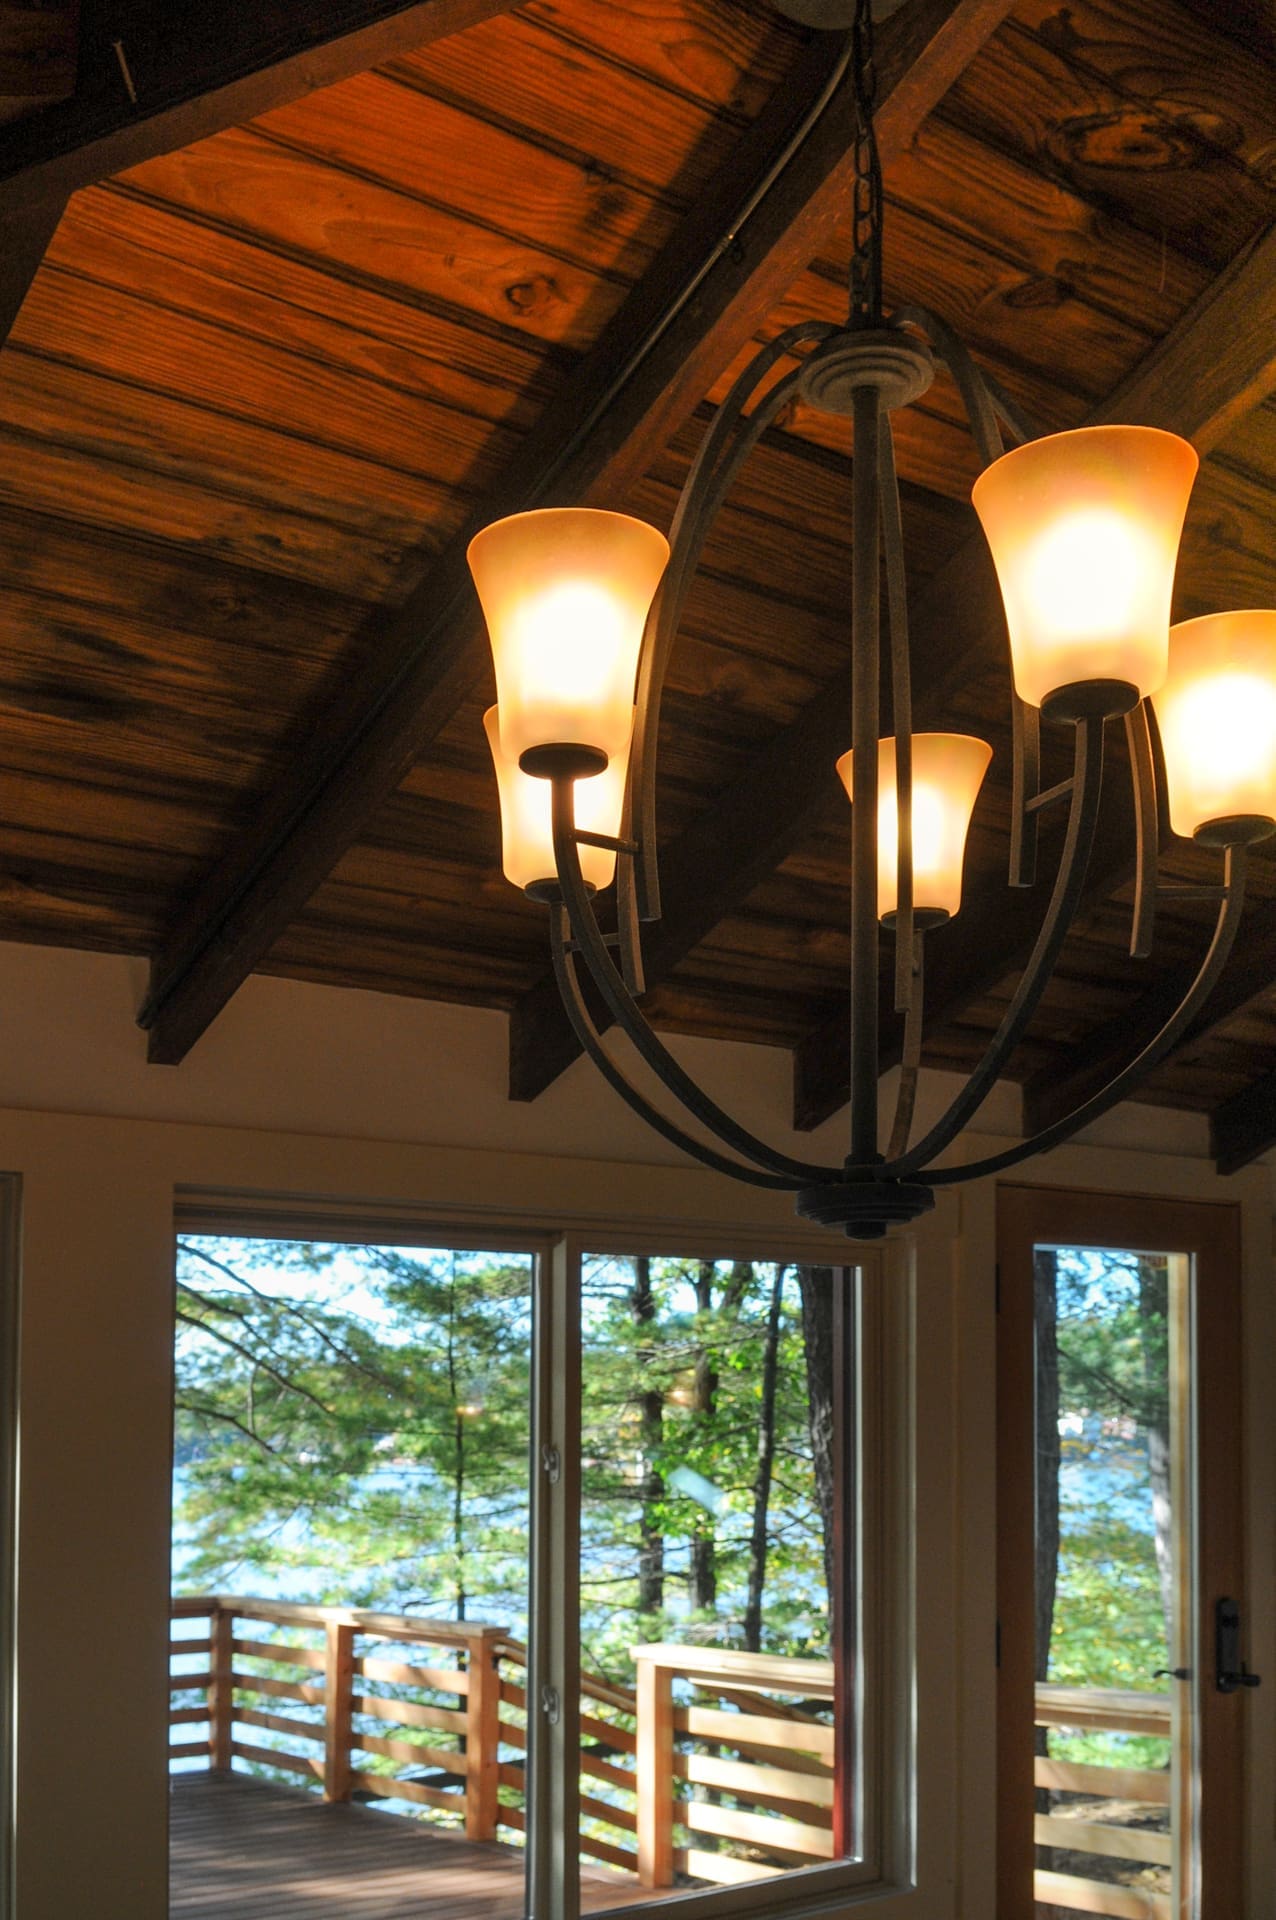 A photo of a rustic light fixture hanging from wooden vaulted ceilings.